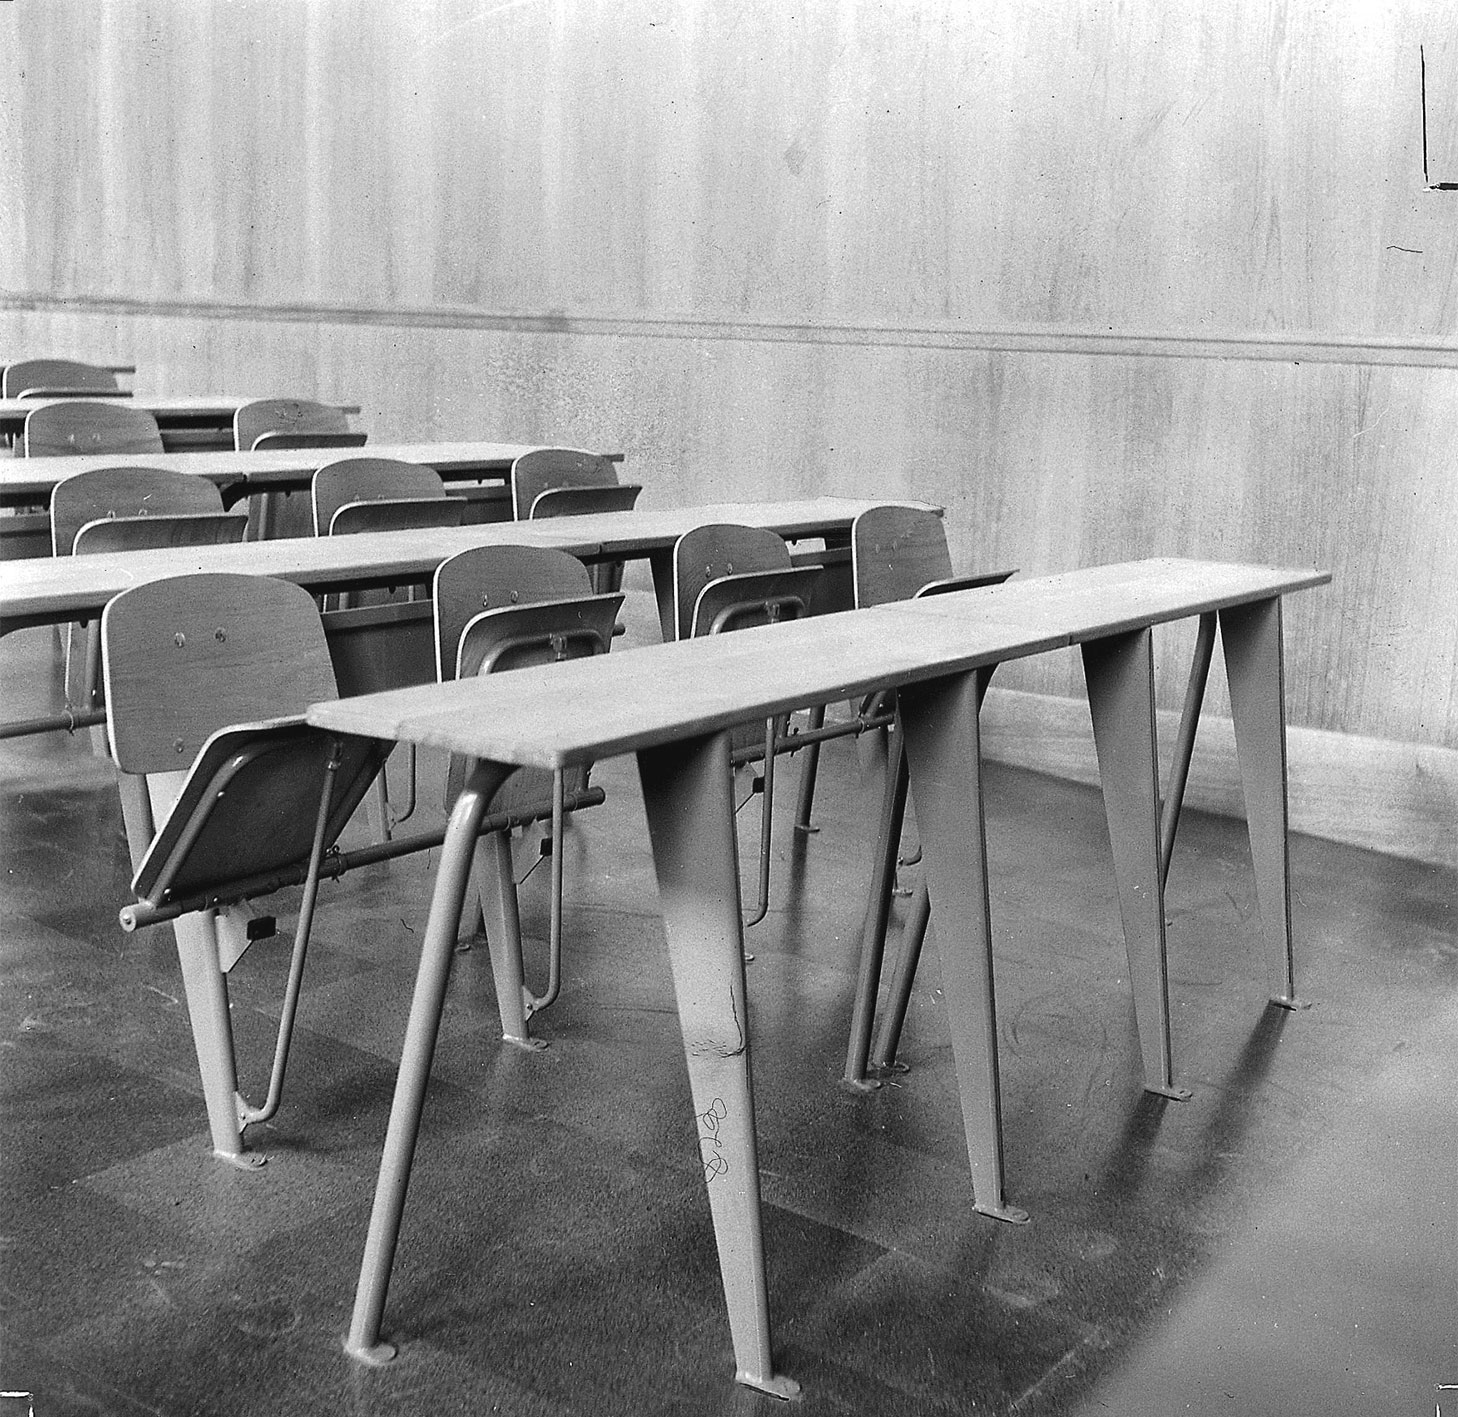 Lecture hall desk with lift-up seat, “Lisbonne” model, 1951.